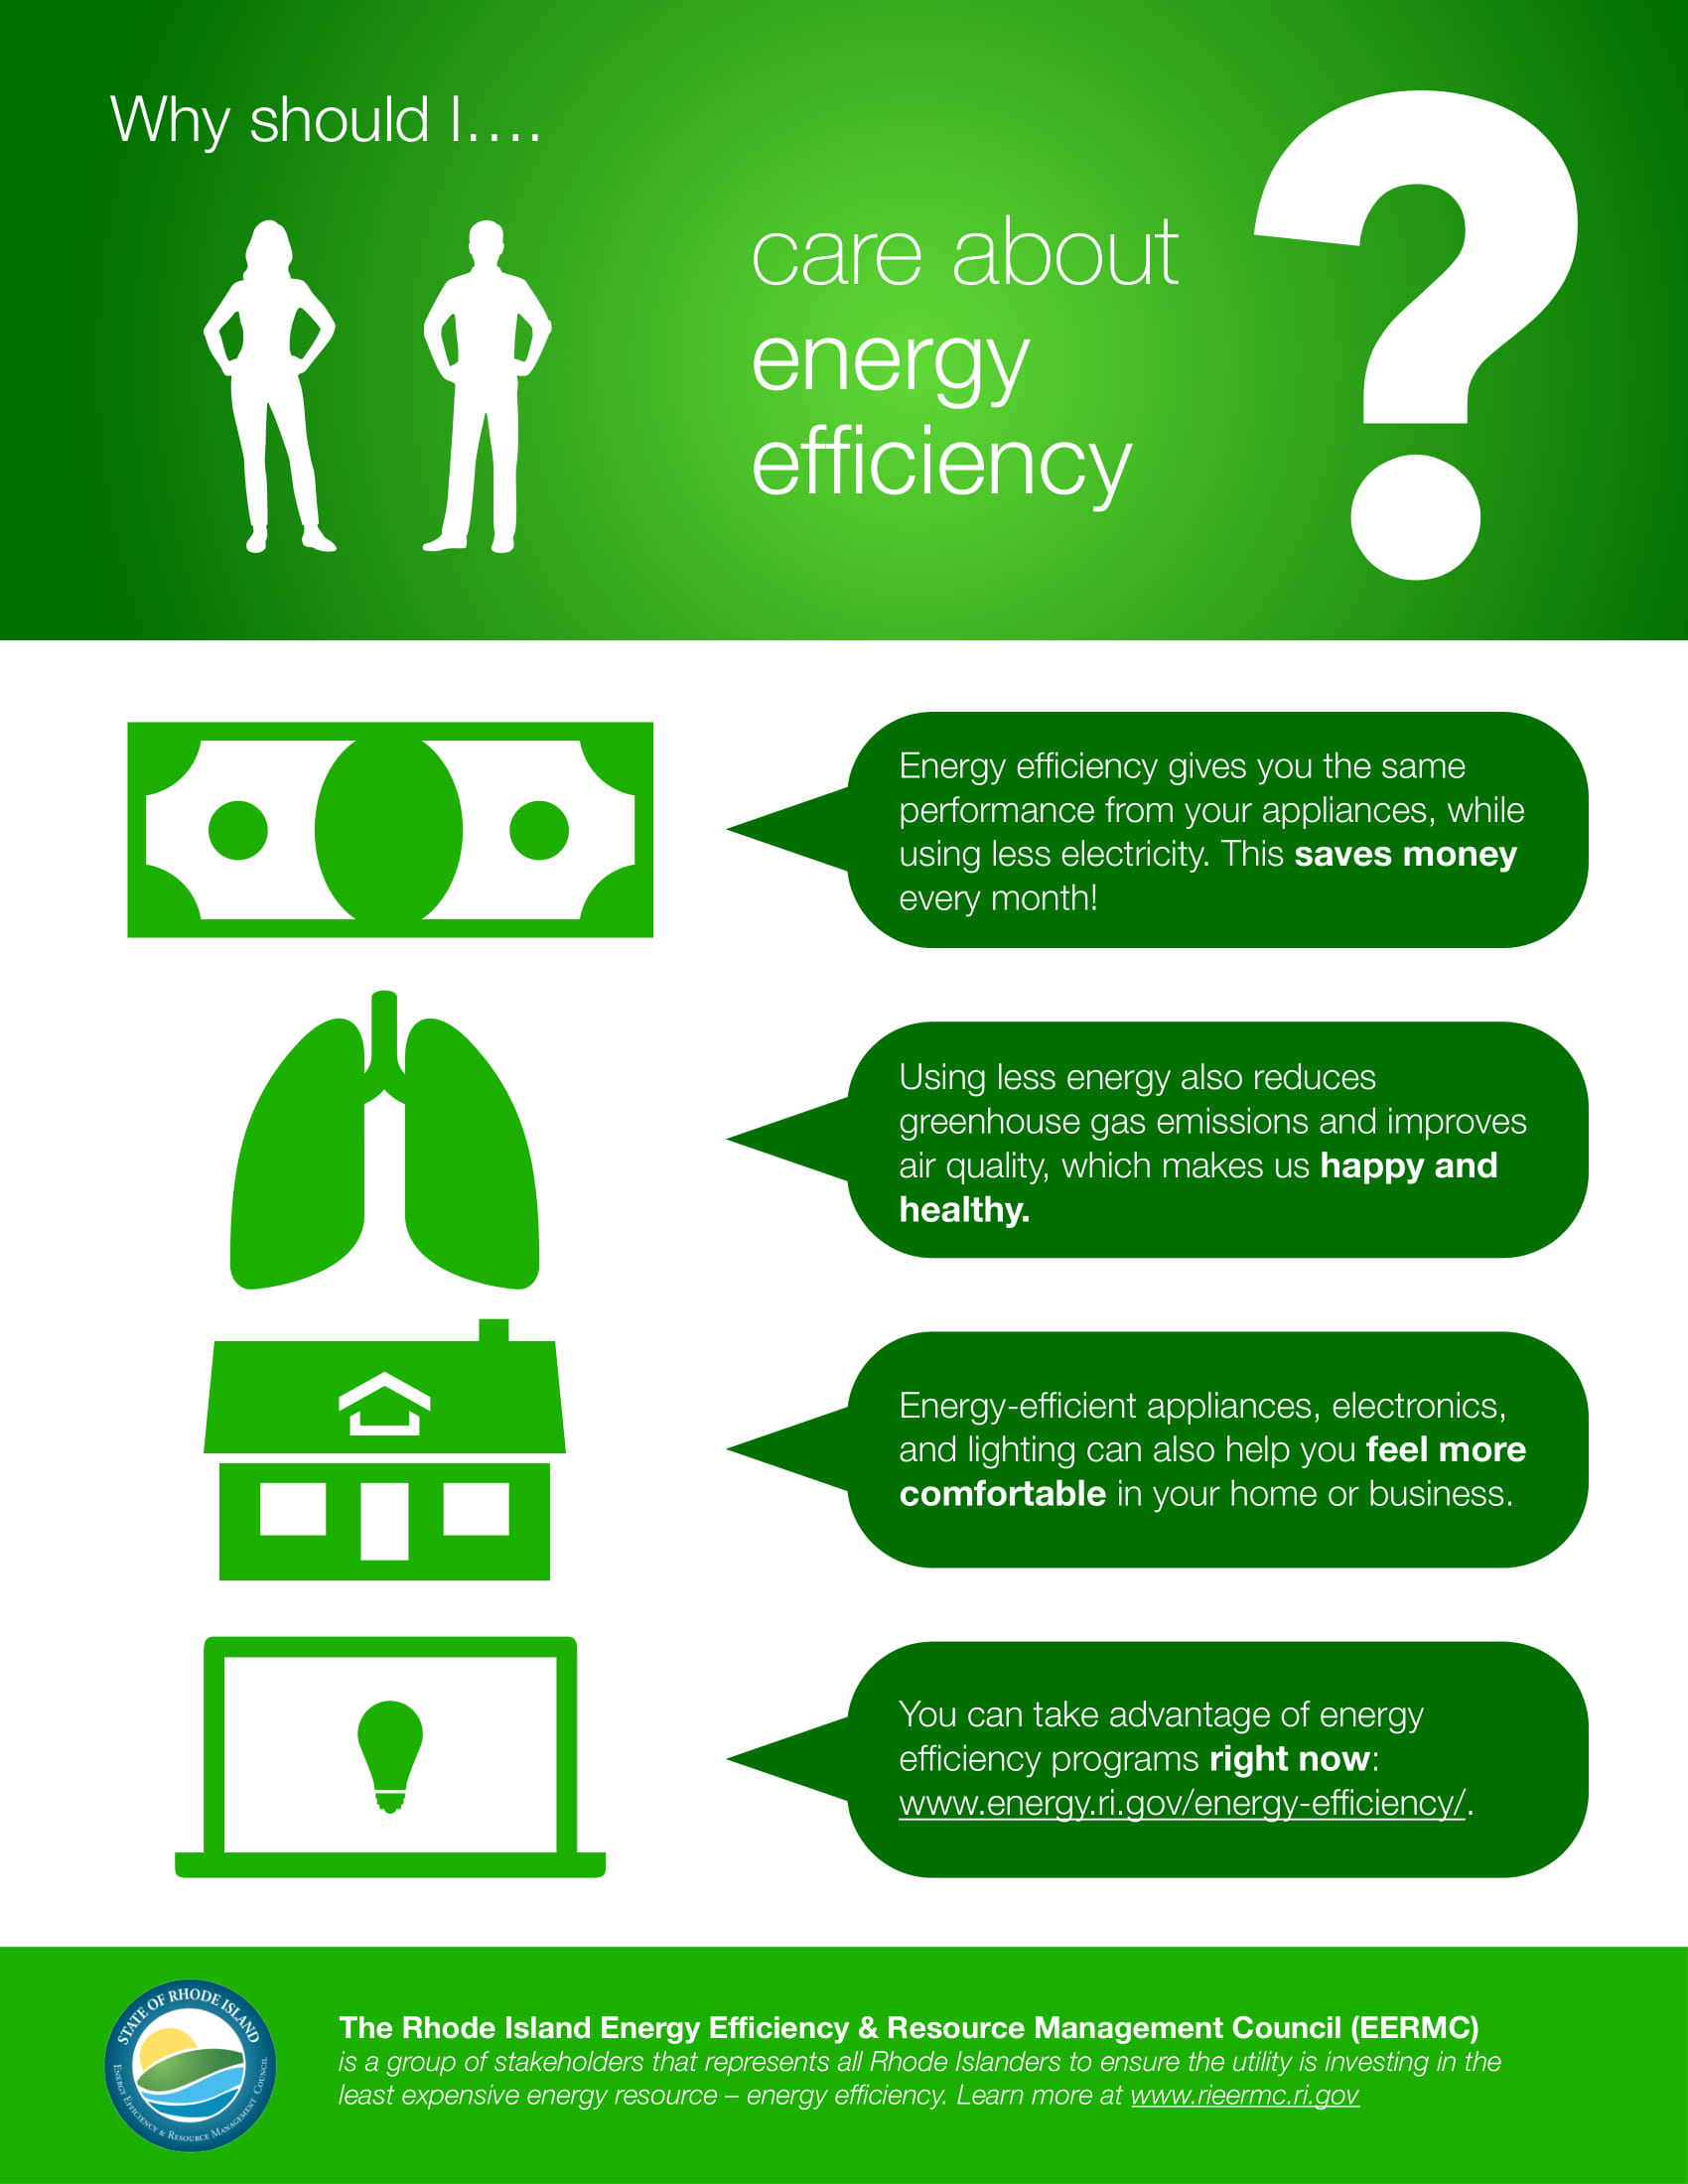 why-should-i-care-about-energy-efficiency-1